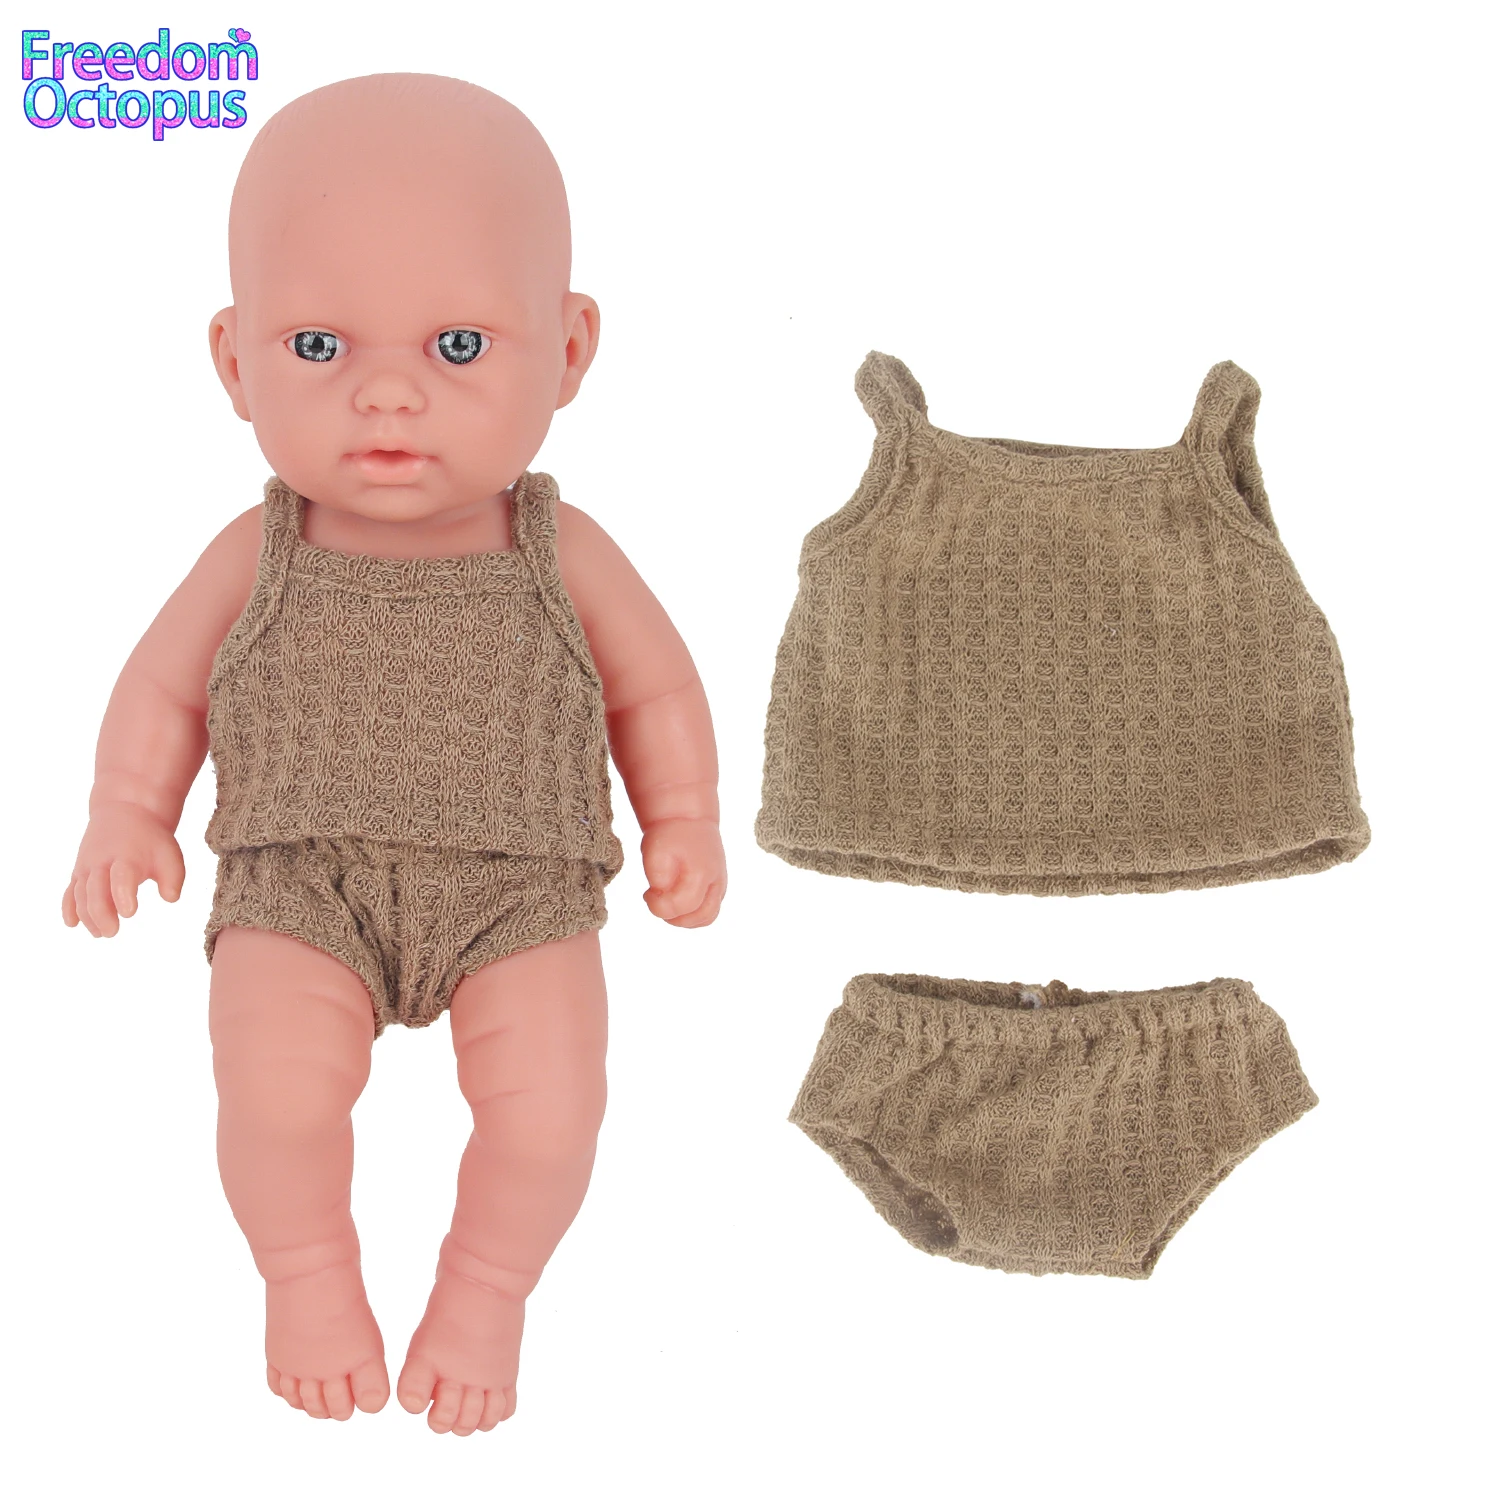 New 12 Inch Doll Clothes Accessories Doll Sling Knit Pajama Underwear Set